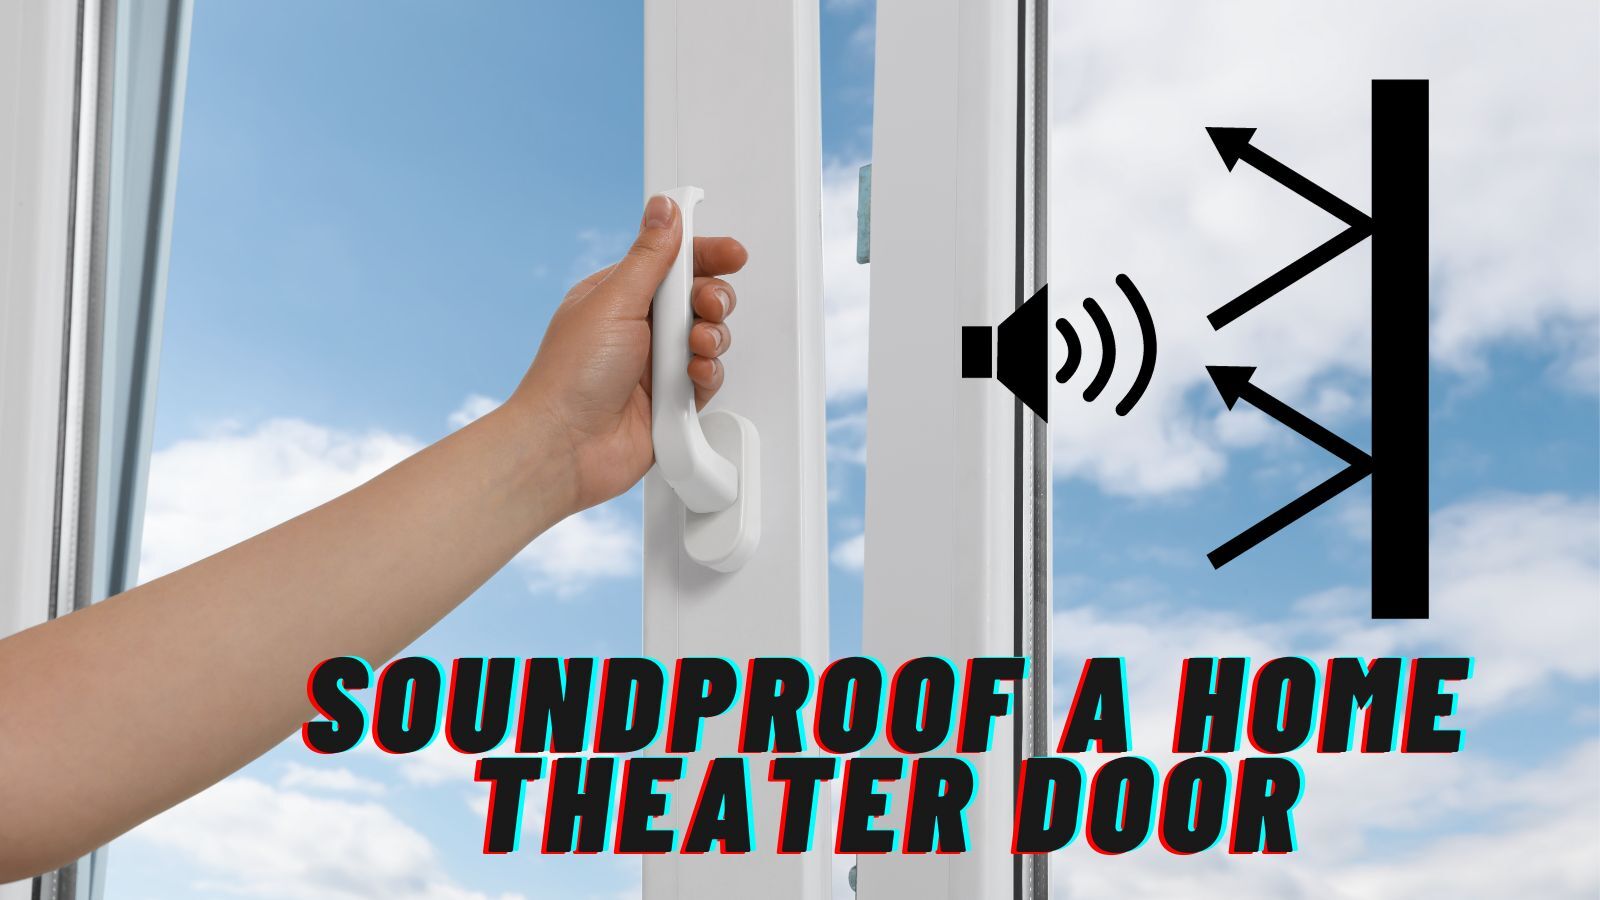 How to Soundproof Home Theater Door? (8 Simple and Practical Ways)